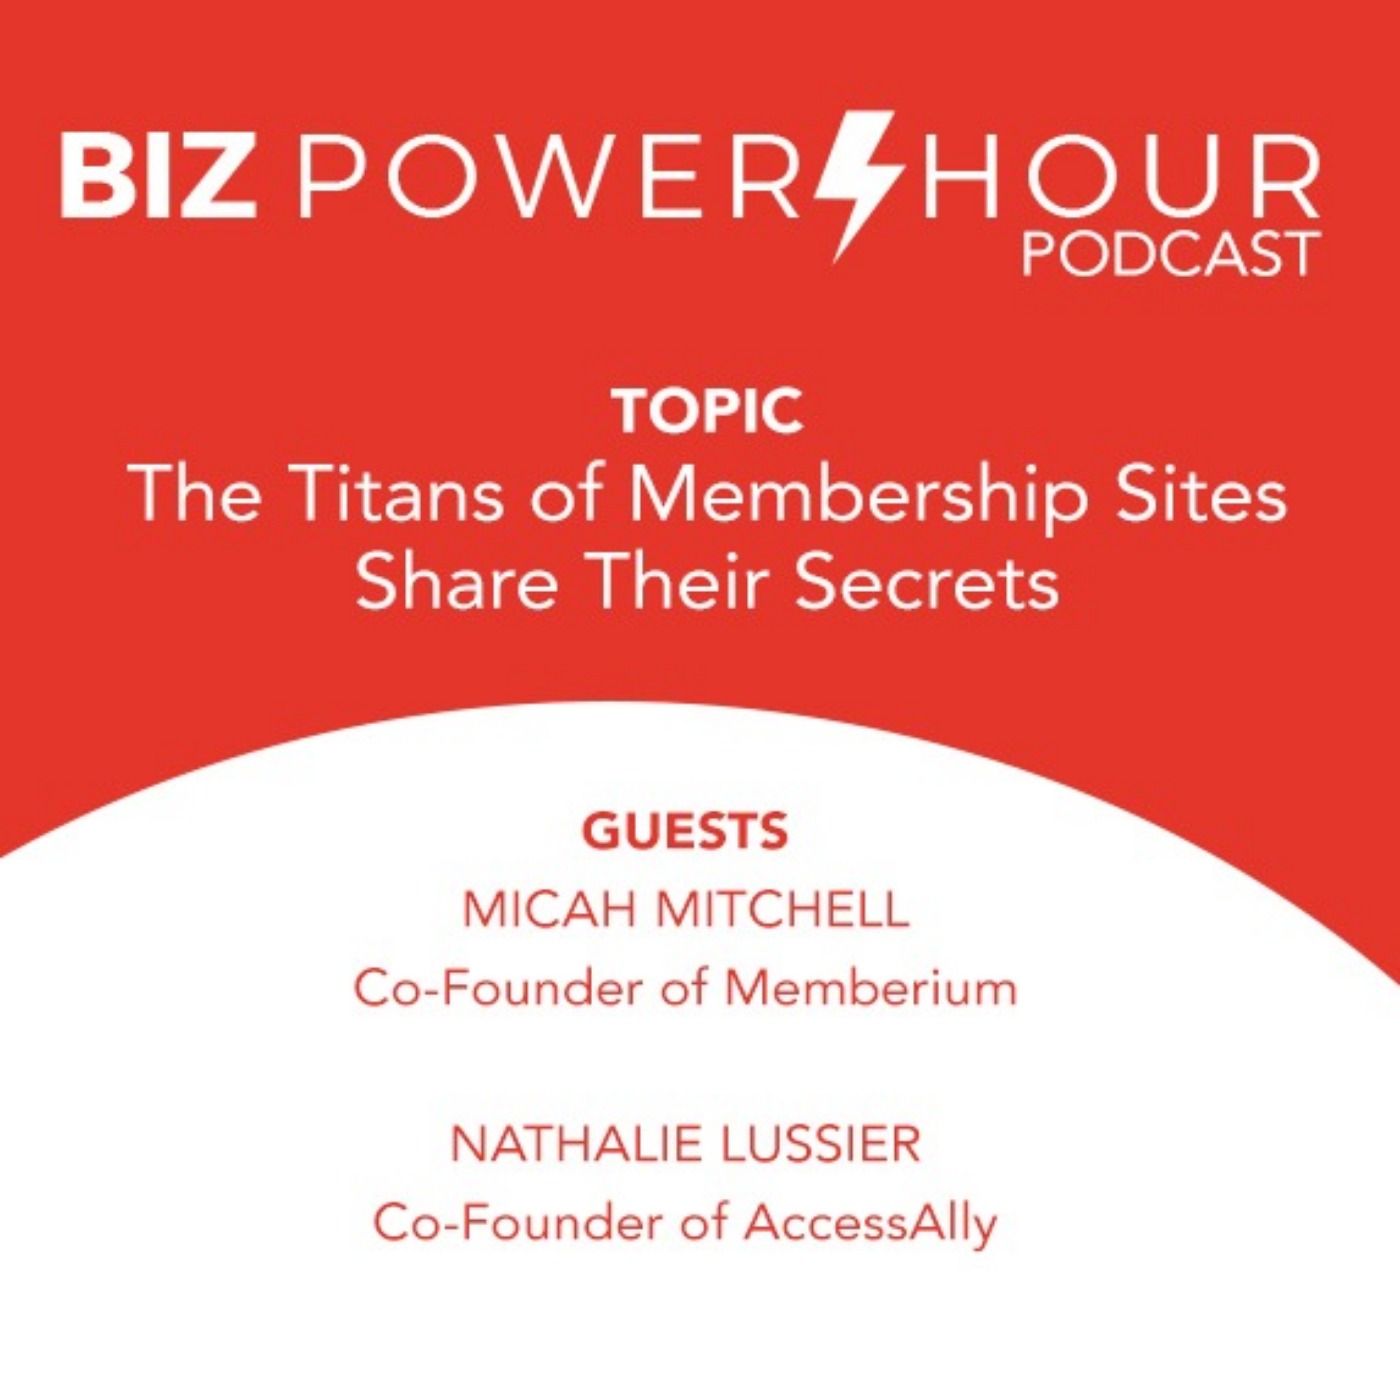 EP4 - The Titans of Membership Sites Share Their Secrets